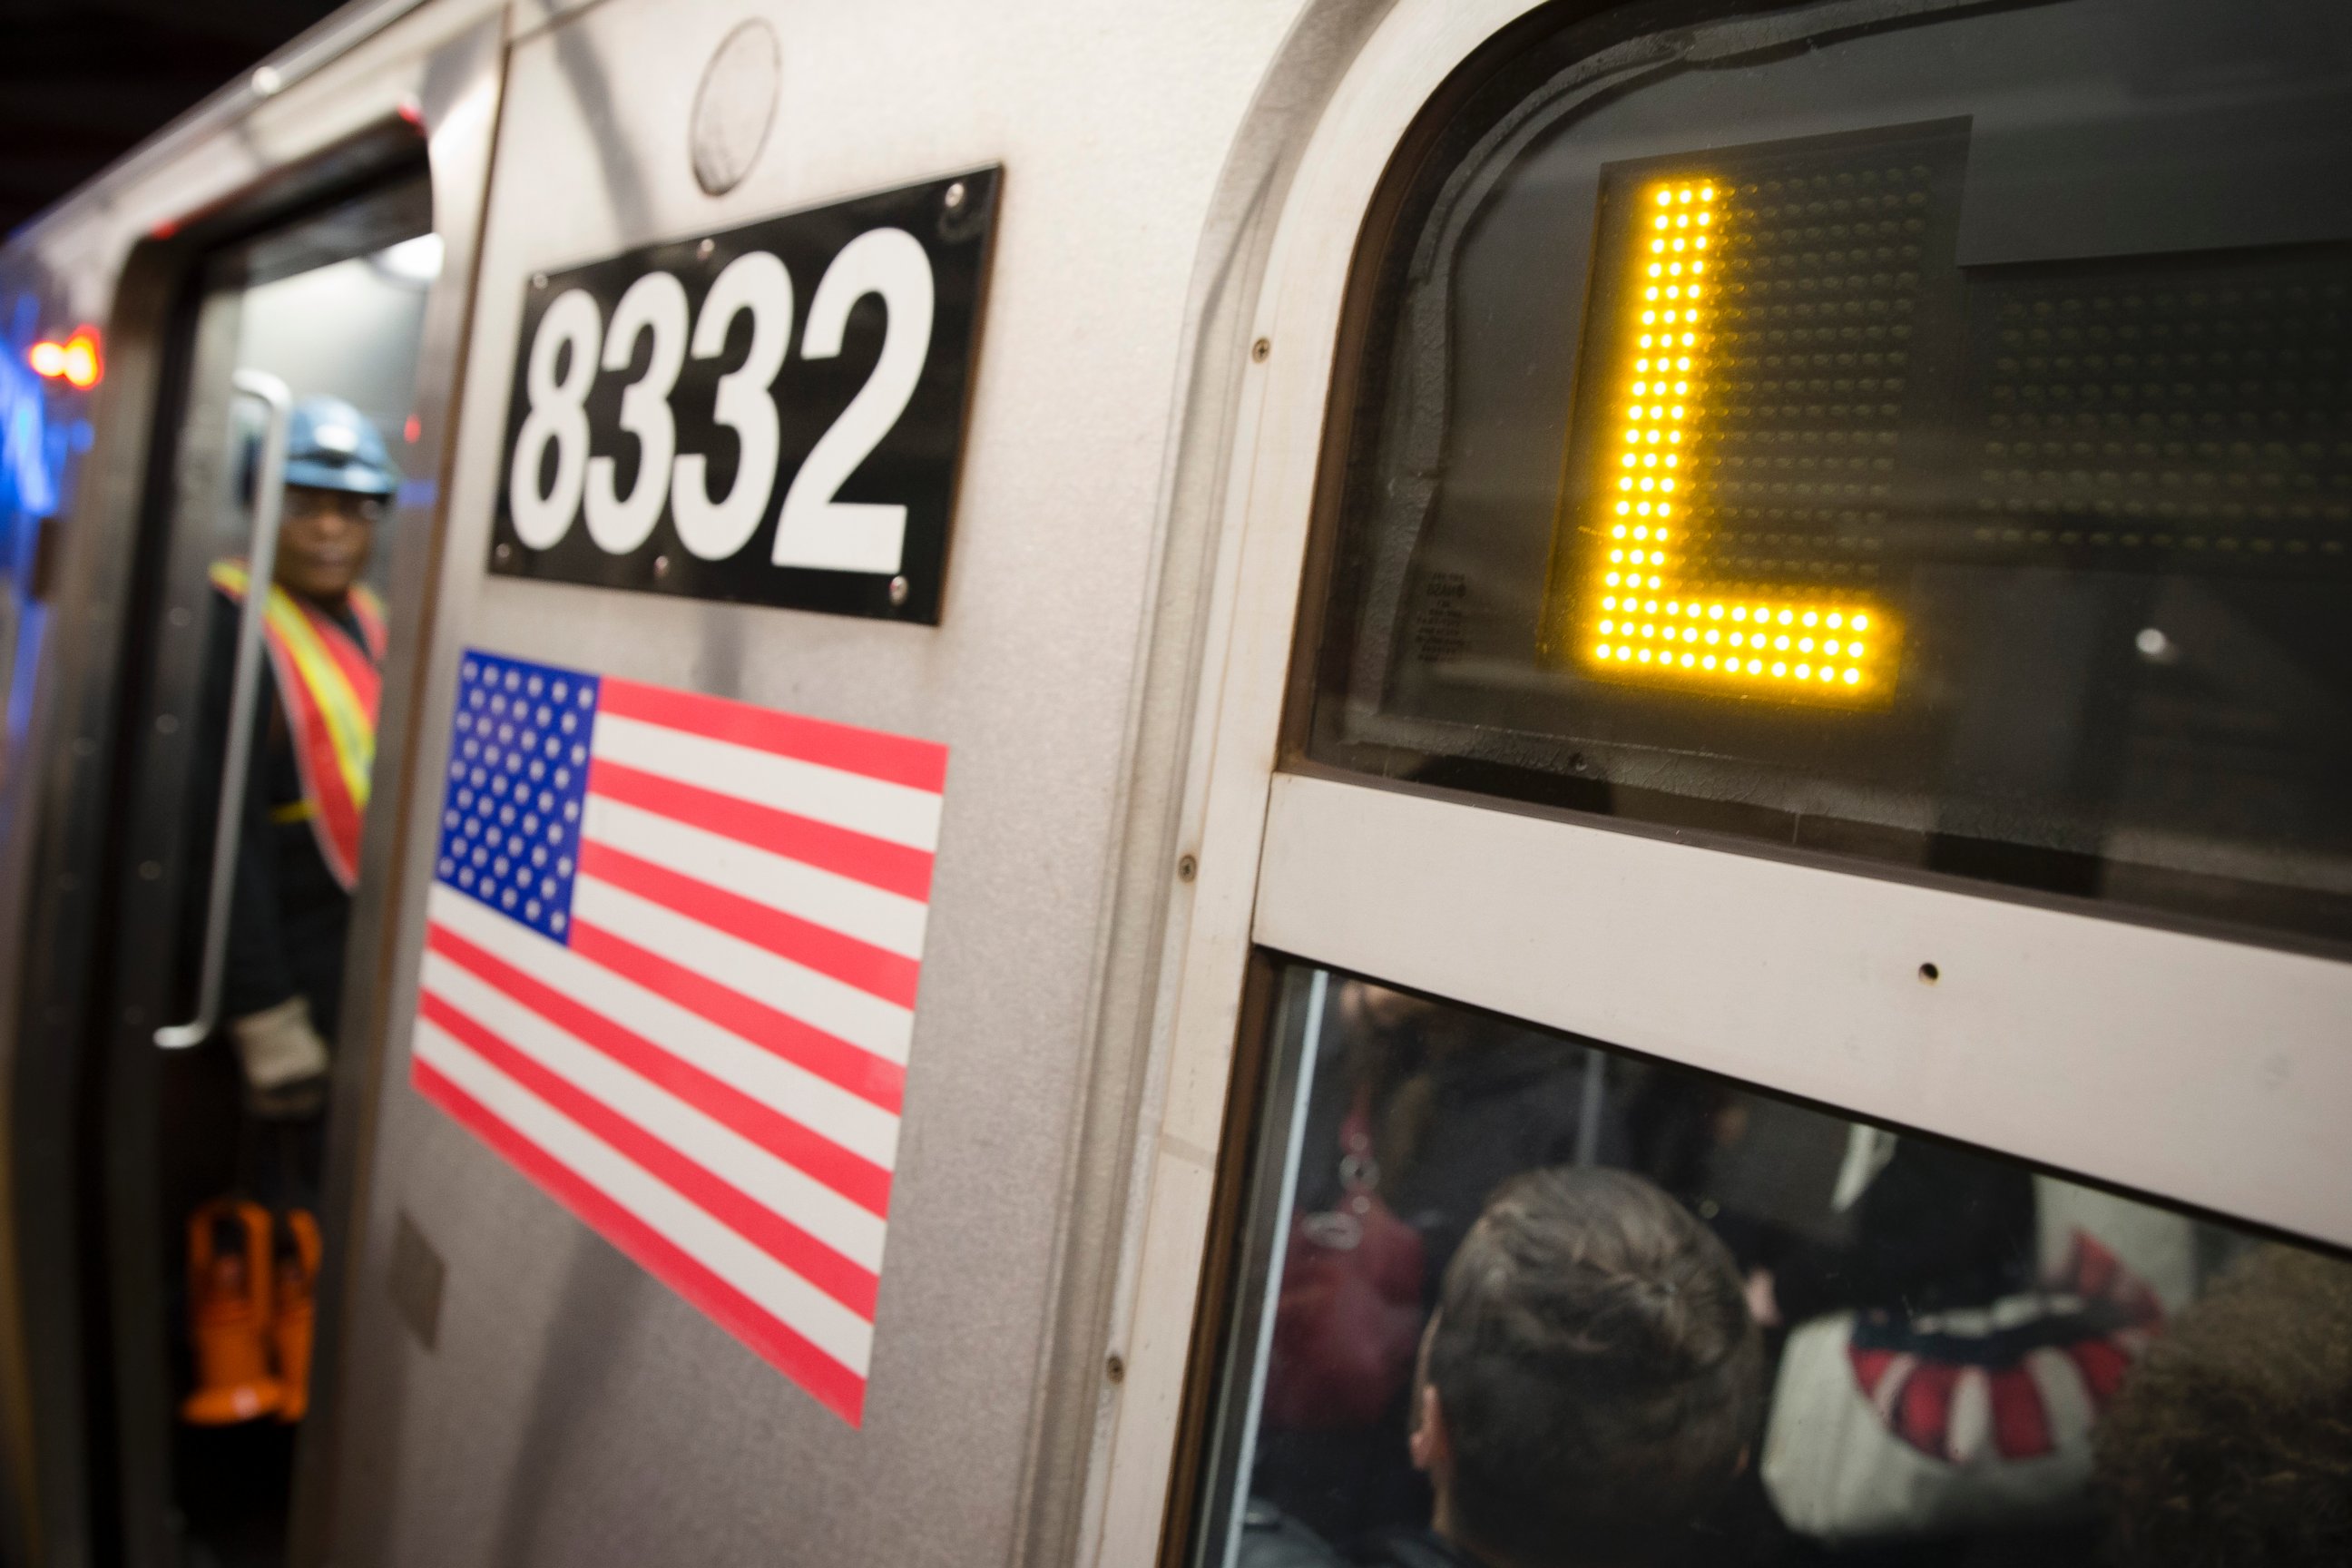 Riders stand inside an L-Train subway car, Thursday, Oct. 23, 2014, in New York.